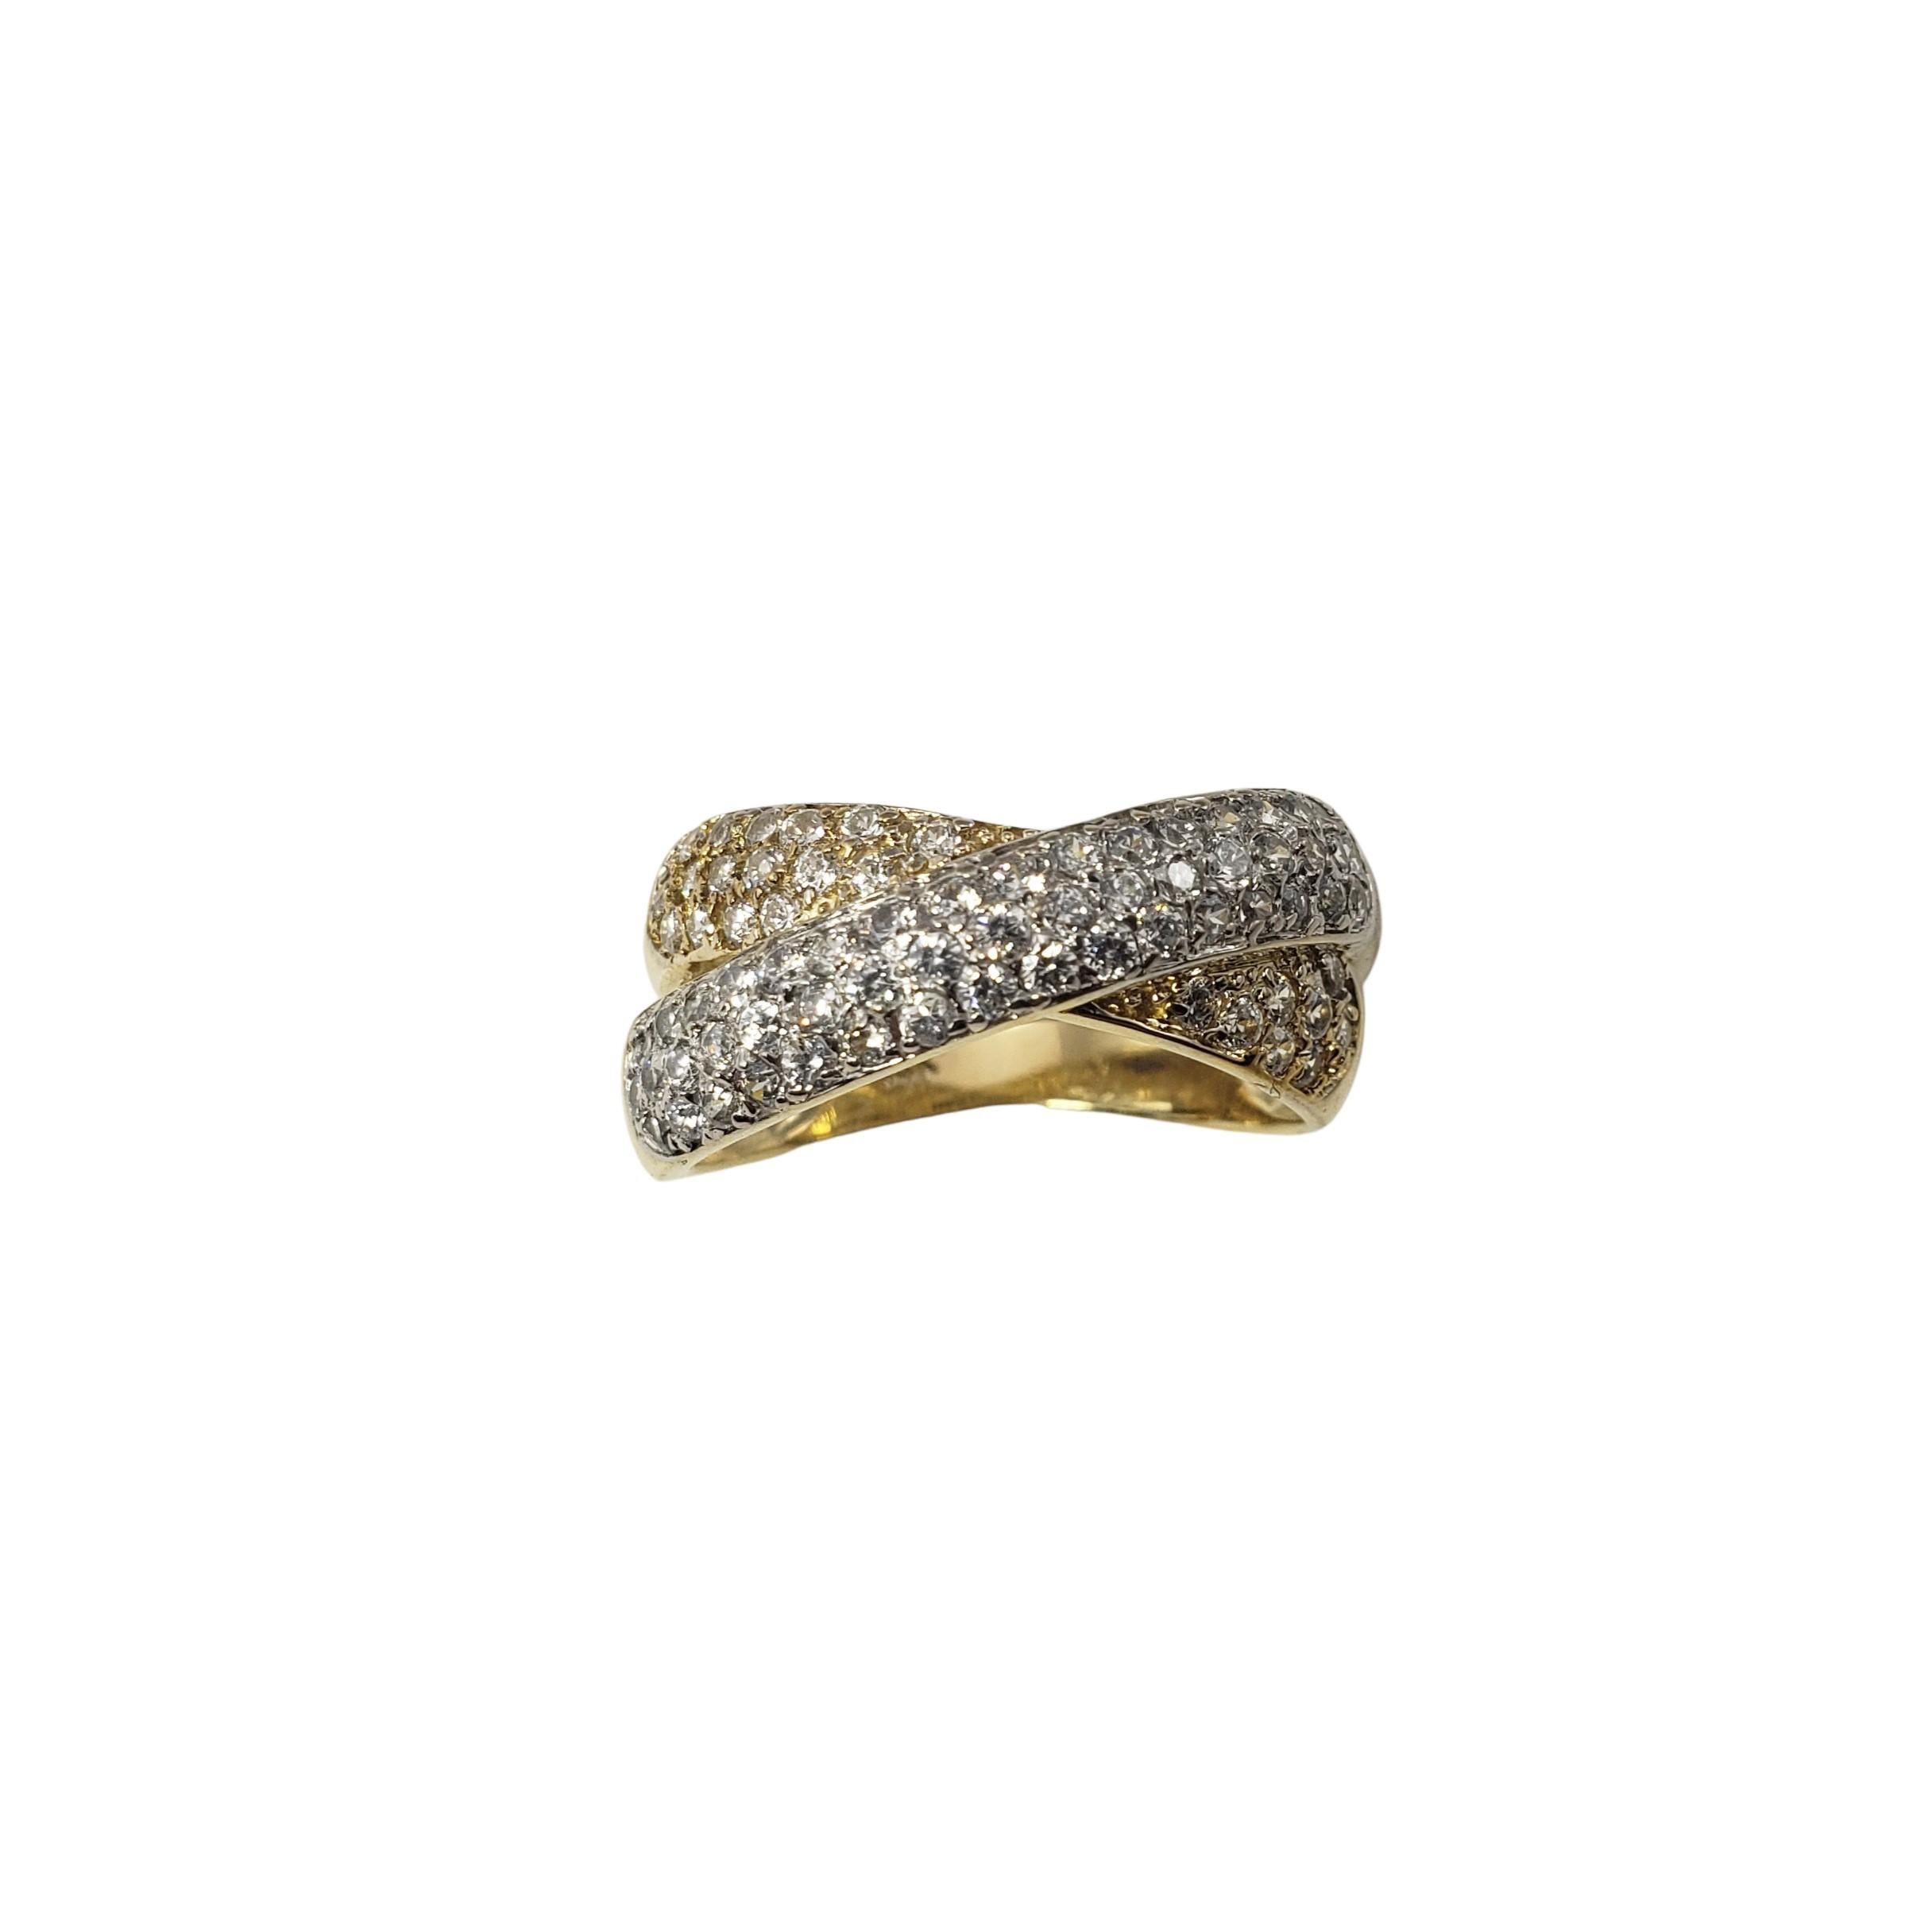 14 Karat Yellow and White Gold Diamond Ring Size 8.25-

This sparkling double band ring features 73 round brilliant cut diamond set in classic 18K yellow gold.  Width:  9 mm.  Shank:  3 mm.

Approximate total diamond weight:  1.10 ct.

Diamond